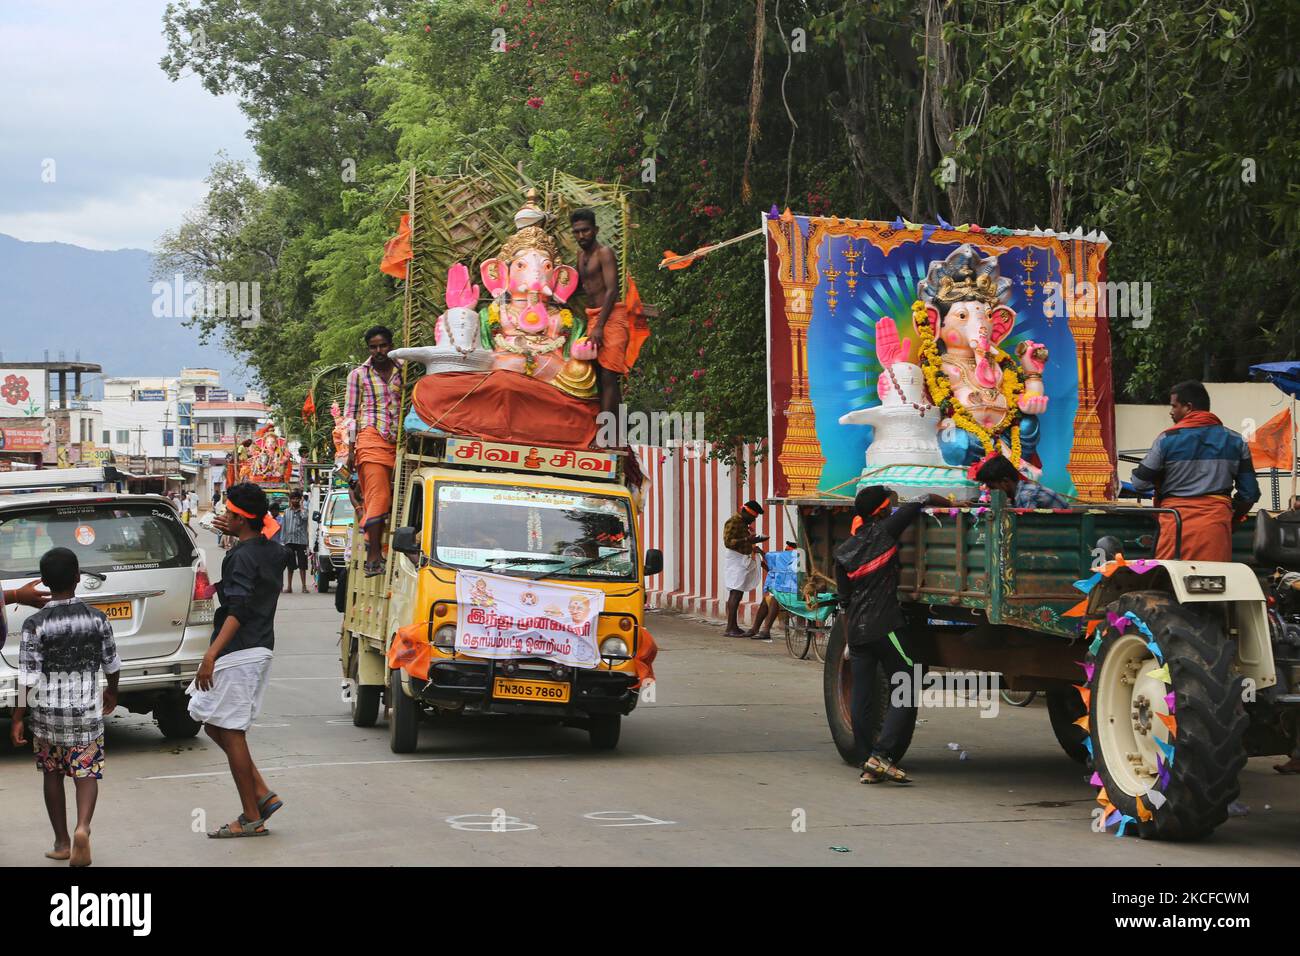 Tamil Hindu devotees with large clay idols of Lord Ganesha (Lord Ganesh) attached to vehicles journey from the Ganesh (Pillaiyar) temple to the ocean during the festival of Ganesh Chaturthi in the town of Palani (Pazhani) in Tamil Nadu, India. Once at the ocean prayers will take place before the immersion of the idols into the ocean. Ganesh Chaturthi (also known as Vinayaka Chaturthi) is a Hindu festival celebrating the arrival of Ganesh to earth from Kailash Parvat with his mother Goddess Parvati. (Photo by Creative Touch Imaging Ltd./NurPhoto) Stock Photo